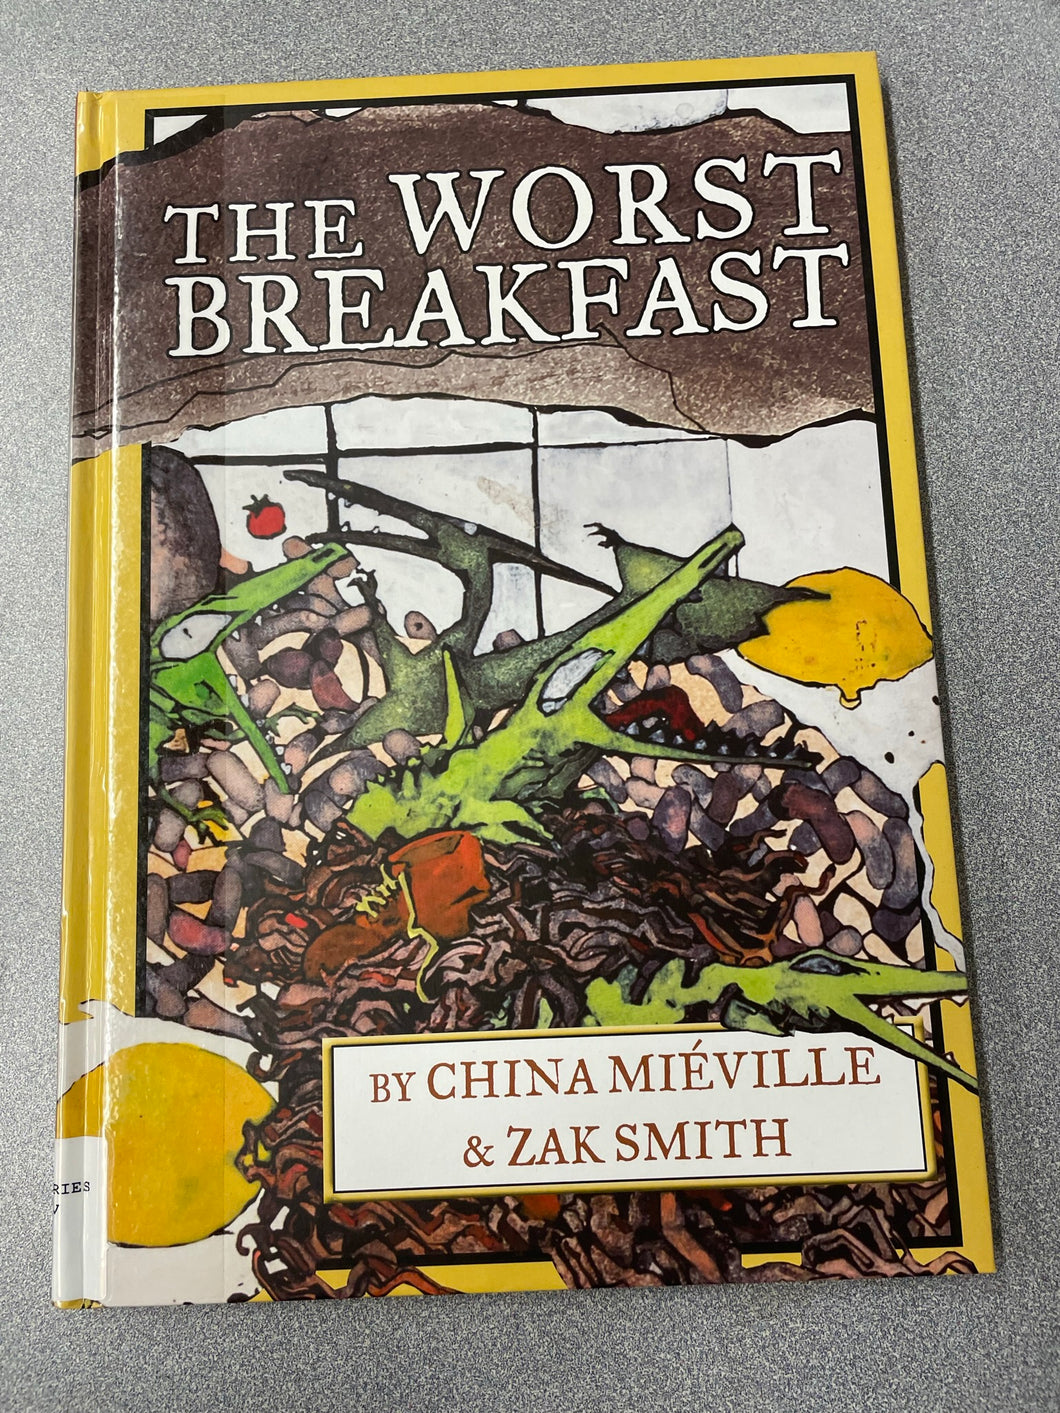 The Worst Breakfast, China Mieville and Zak Smith 2016 GN